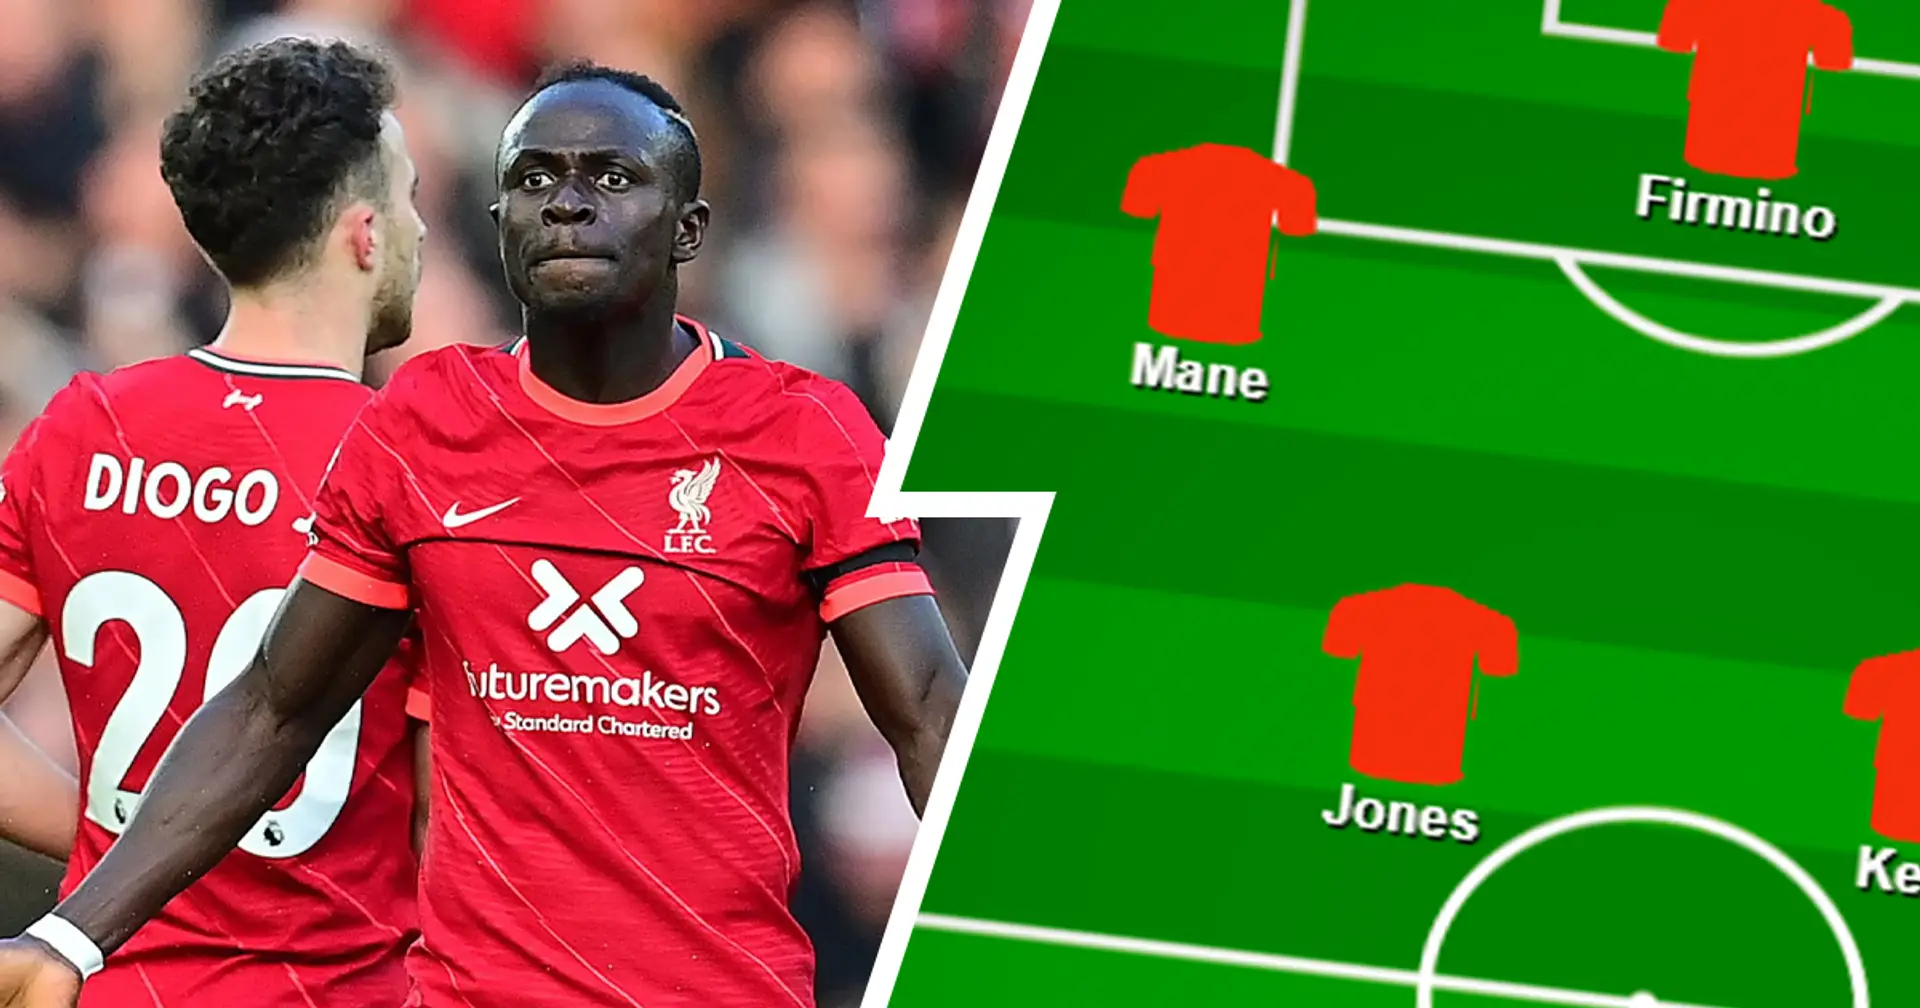 Bring Mane back in? Select your preferred Liverpool XI vs Brighton from 2 options